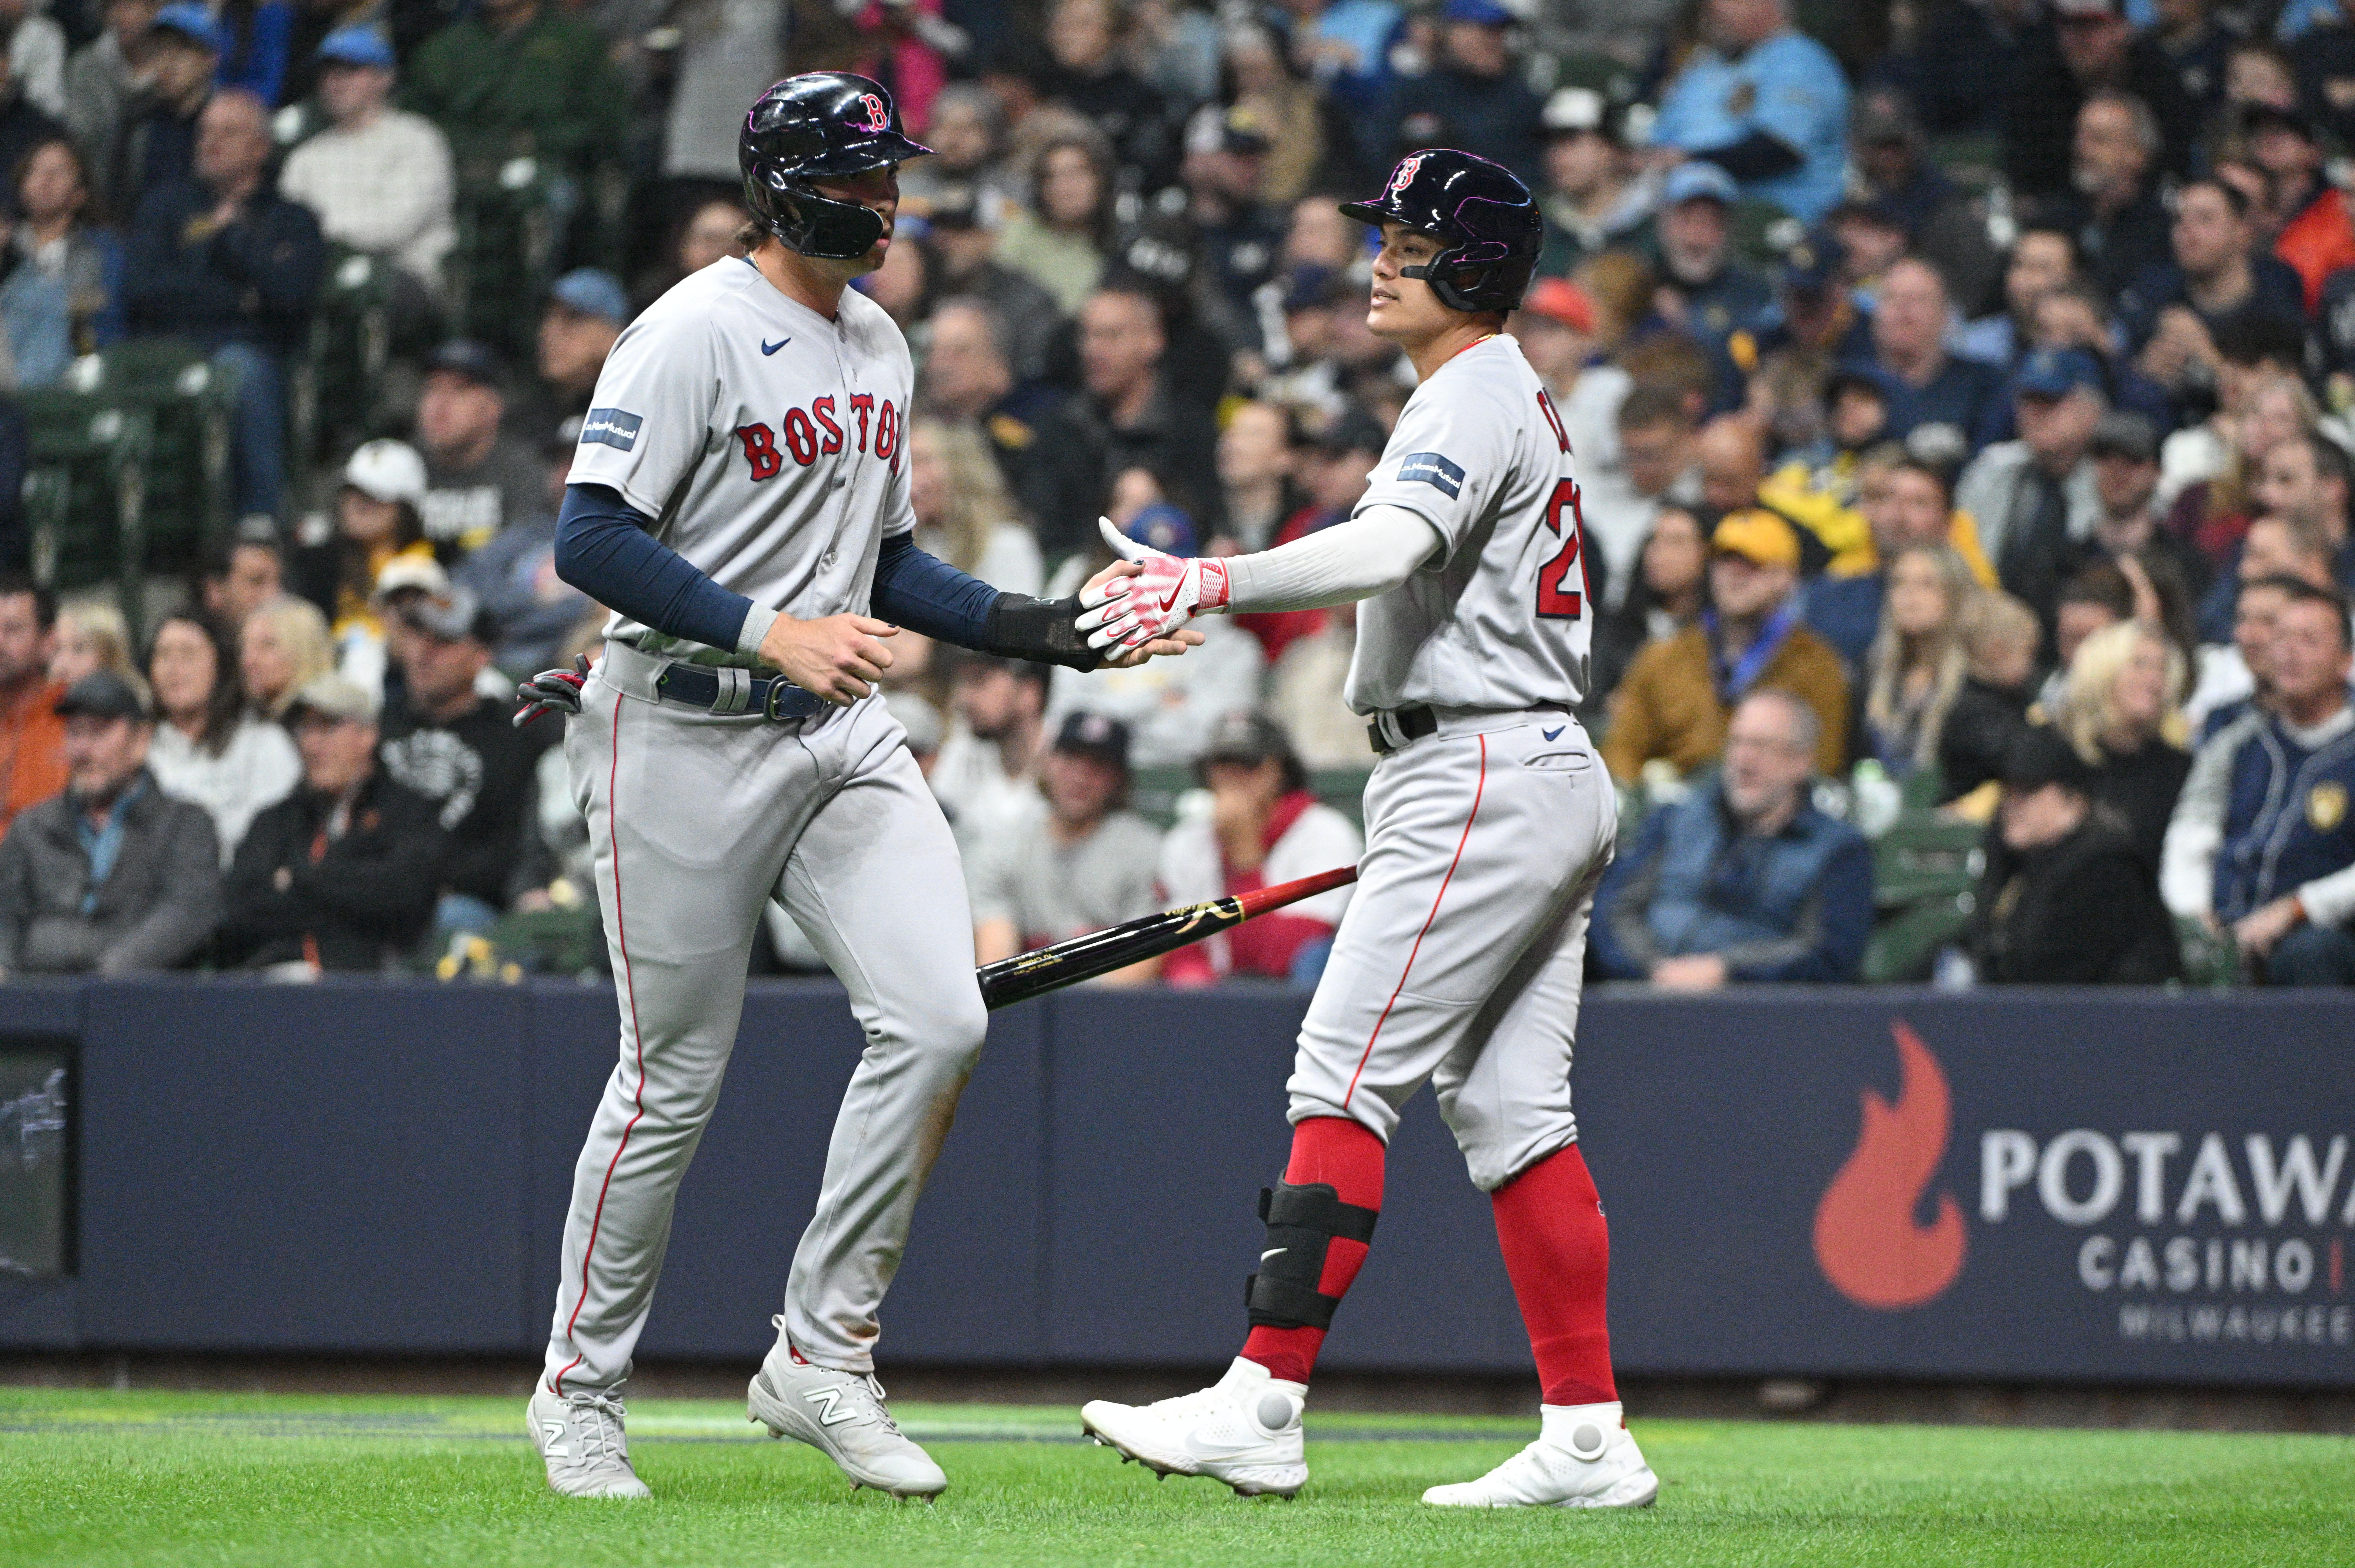 Red Sox open series with victory over Brewers